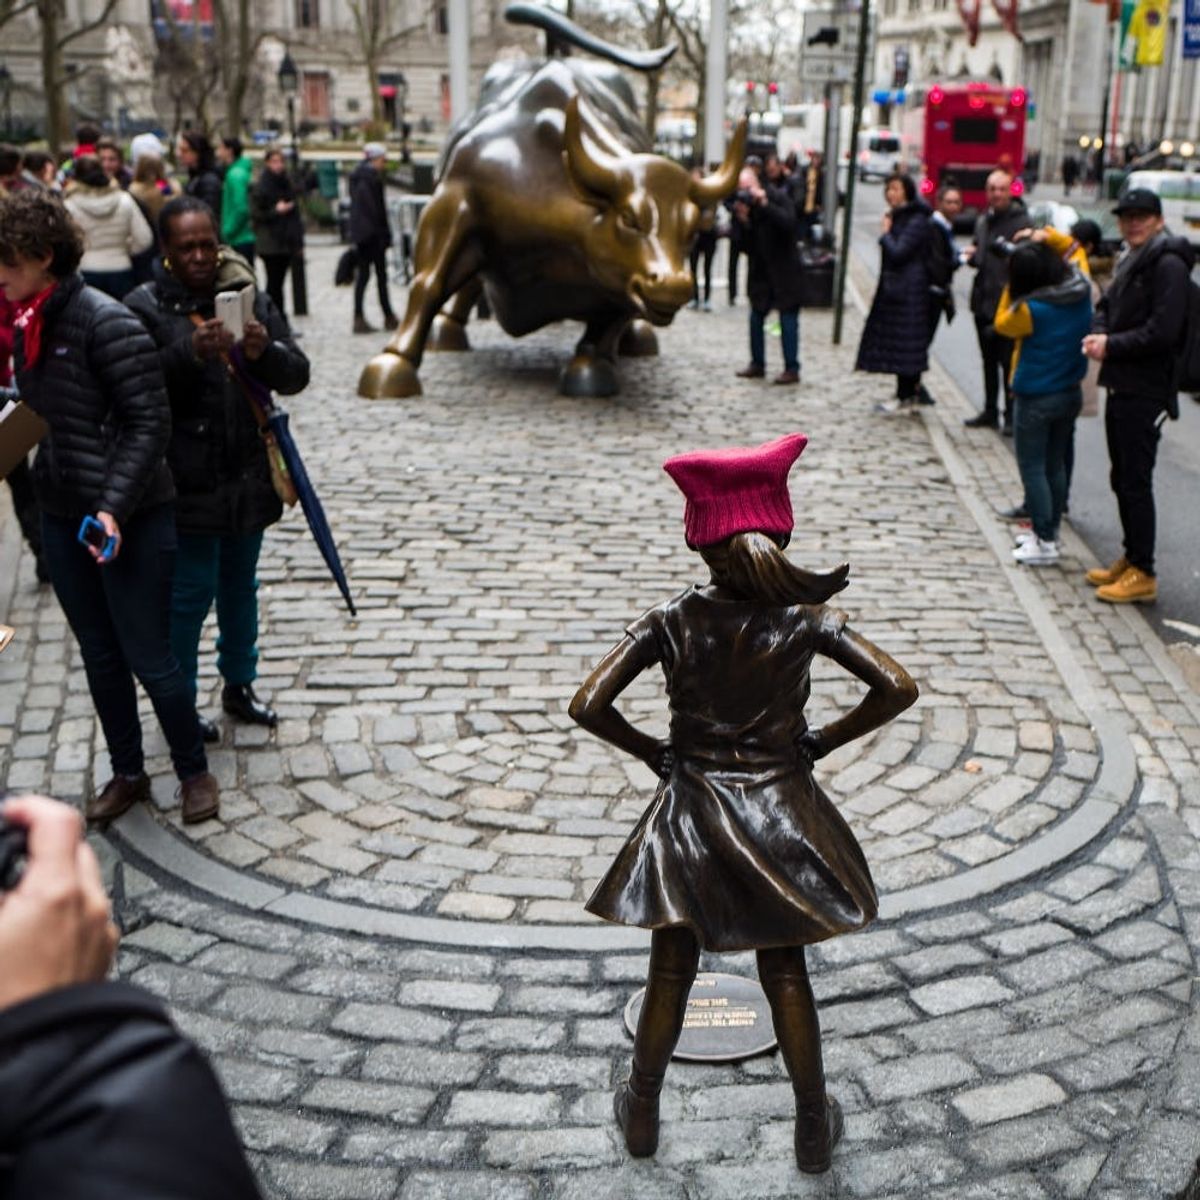 Controversy Has Sparked Over NYC’s Fearless Girl and Charging Bull Statues